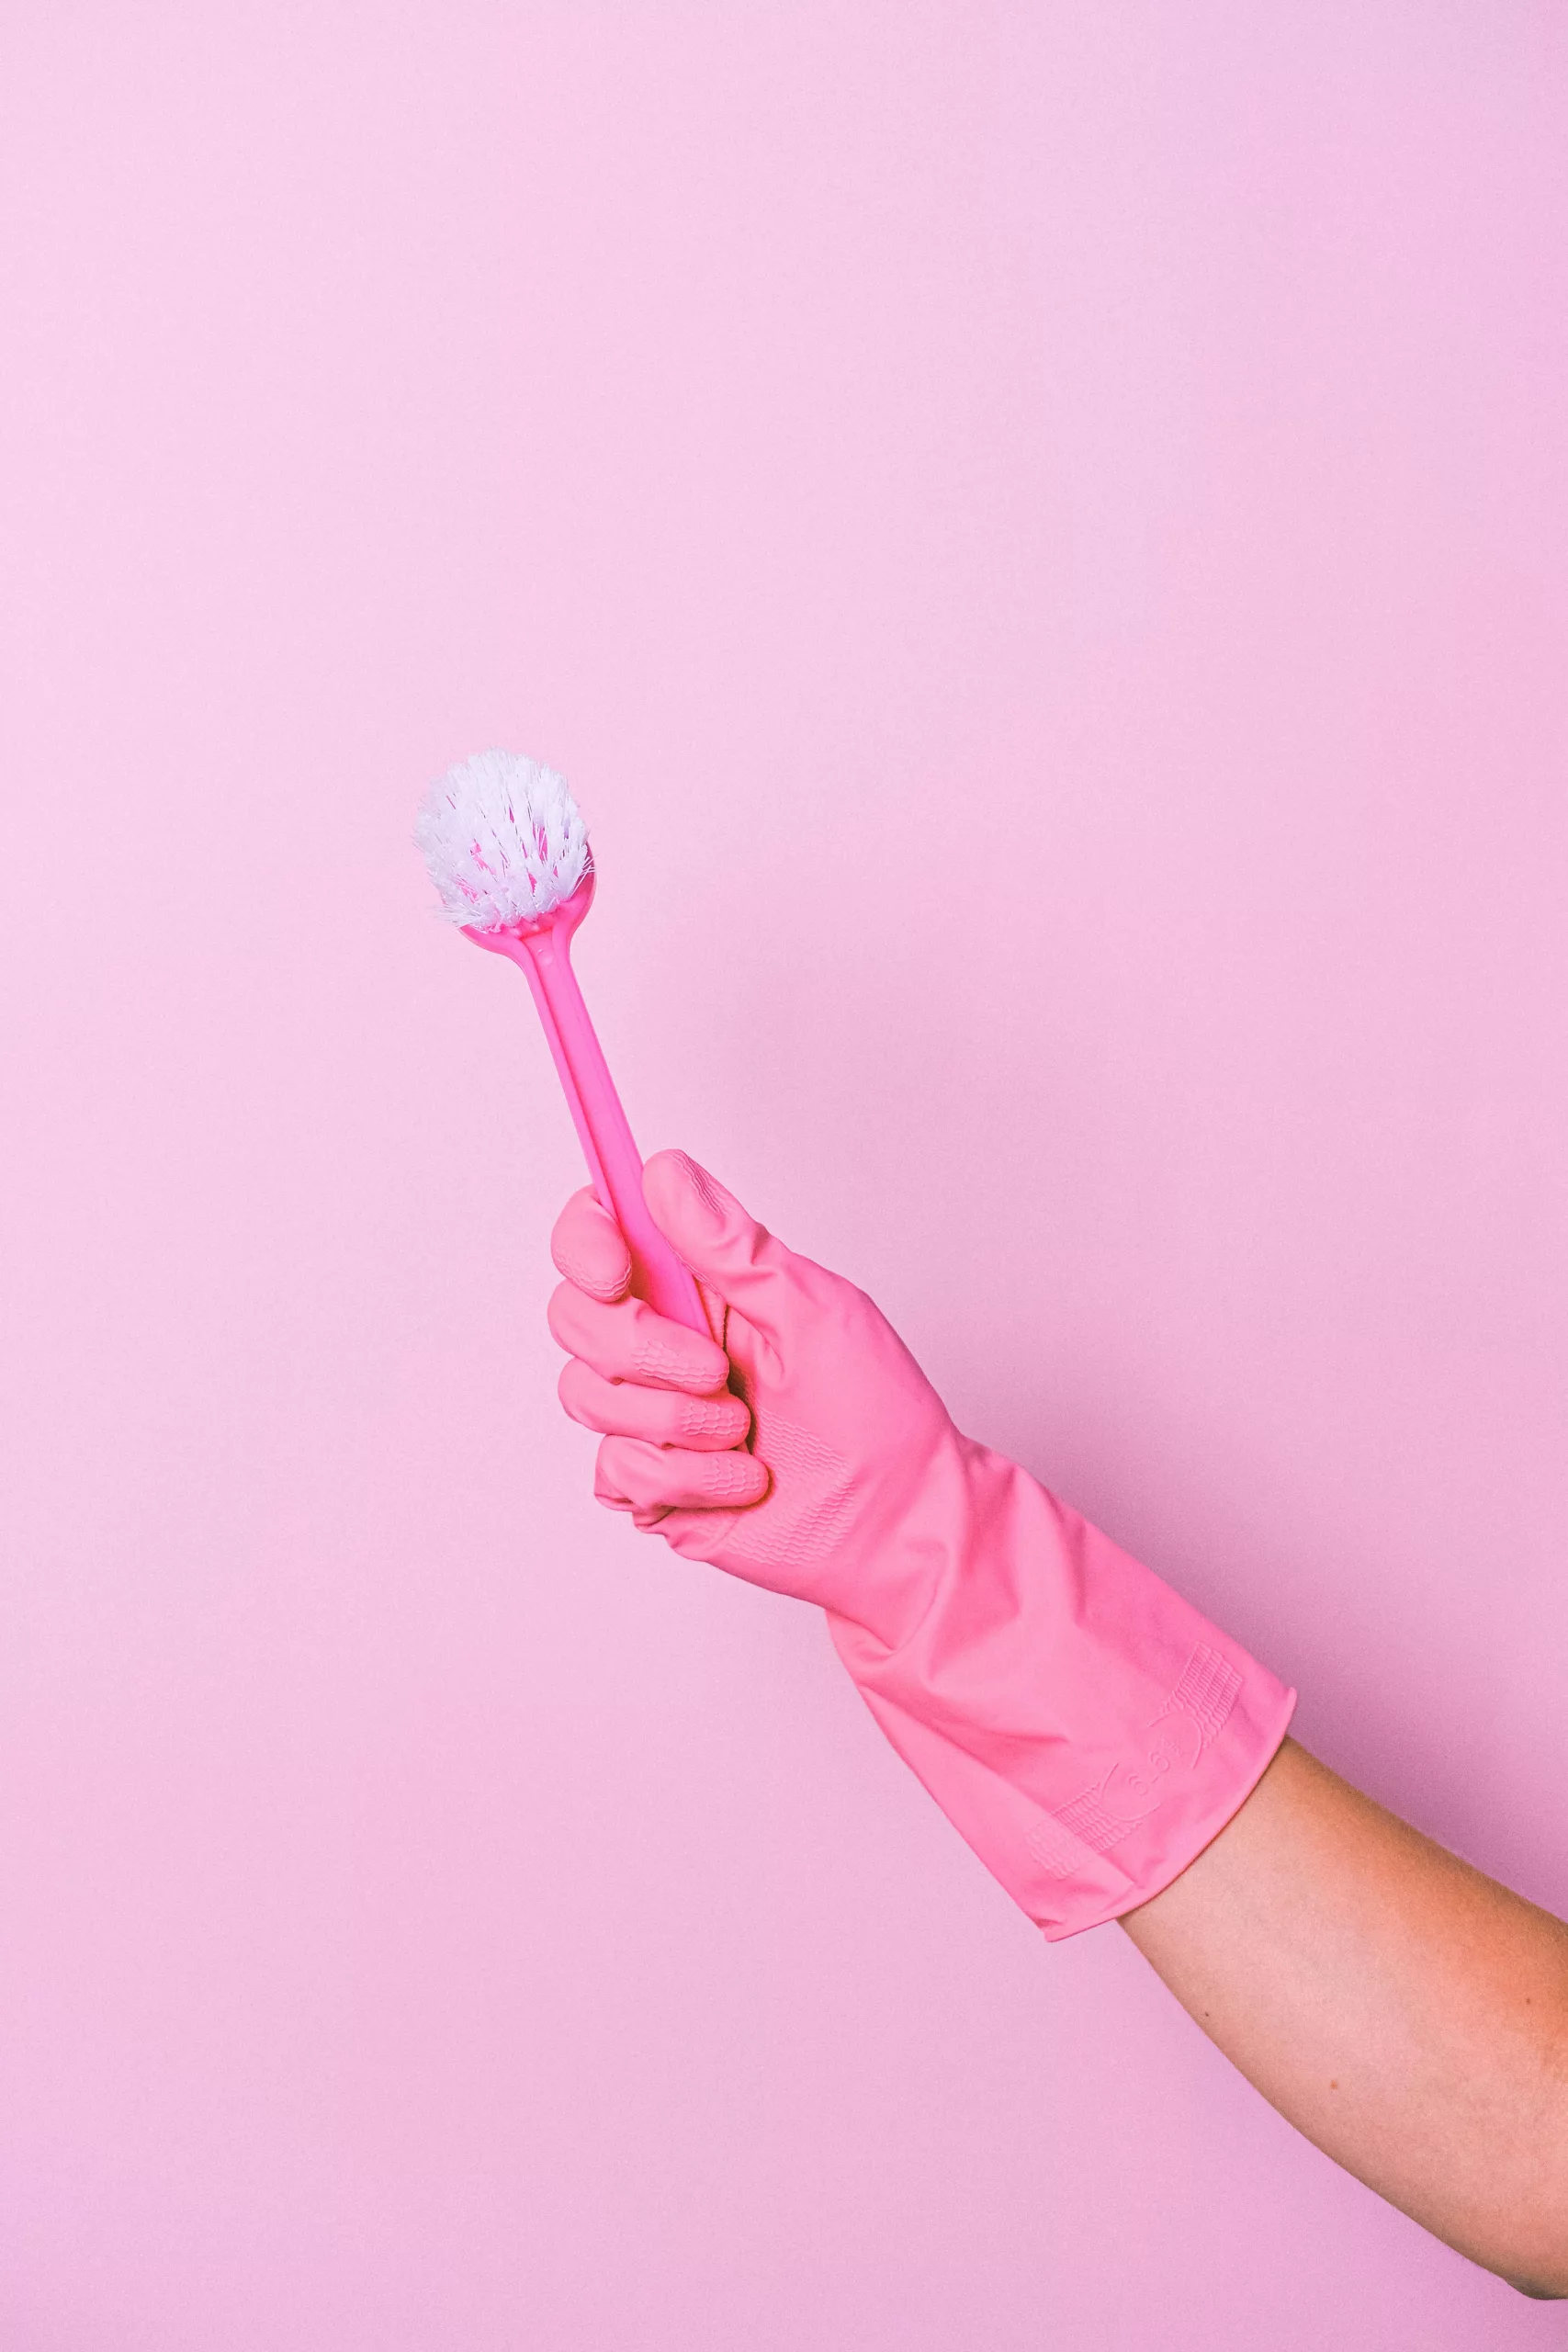 Top 5 Features to Look for in Fort Collins Cleaning Services